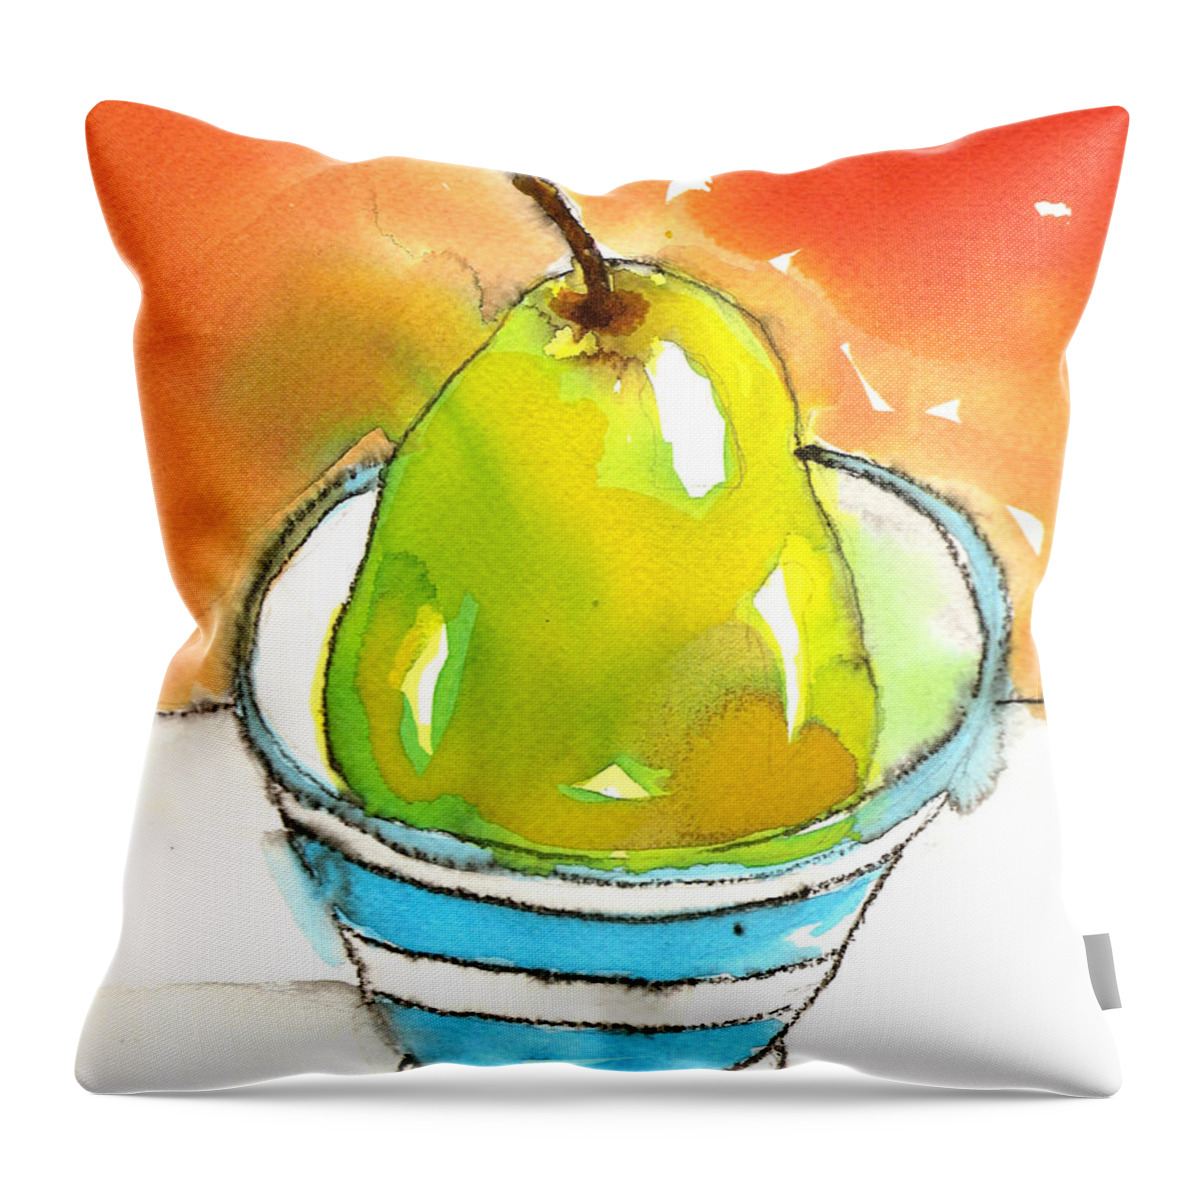 Pear Throw Pillow featuring the painting Green Pear in Blue Striped Bowl by Tracy-Ann Marrison